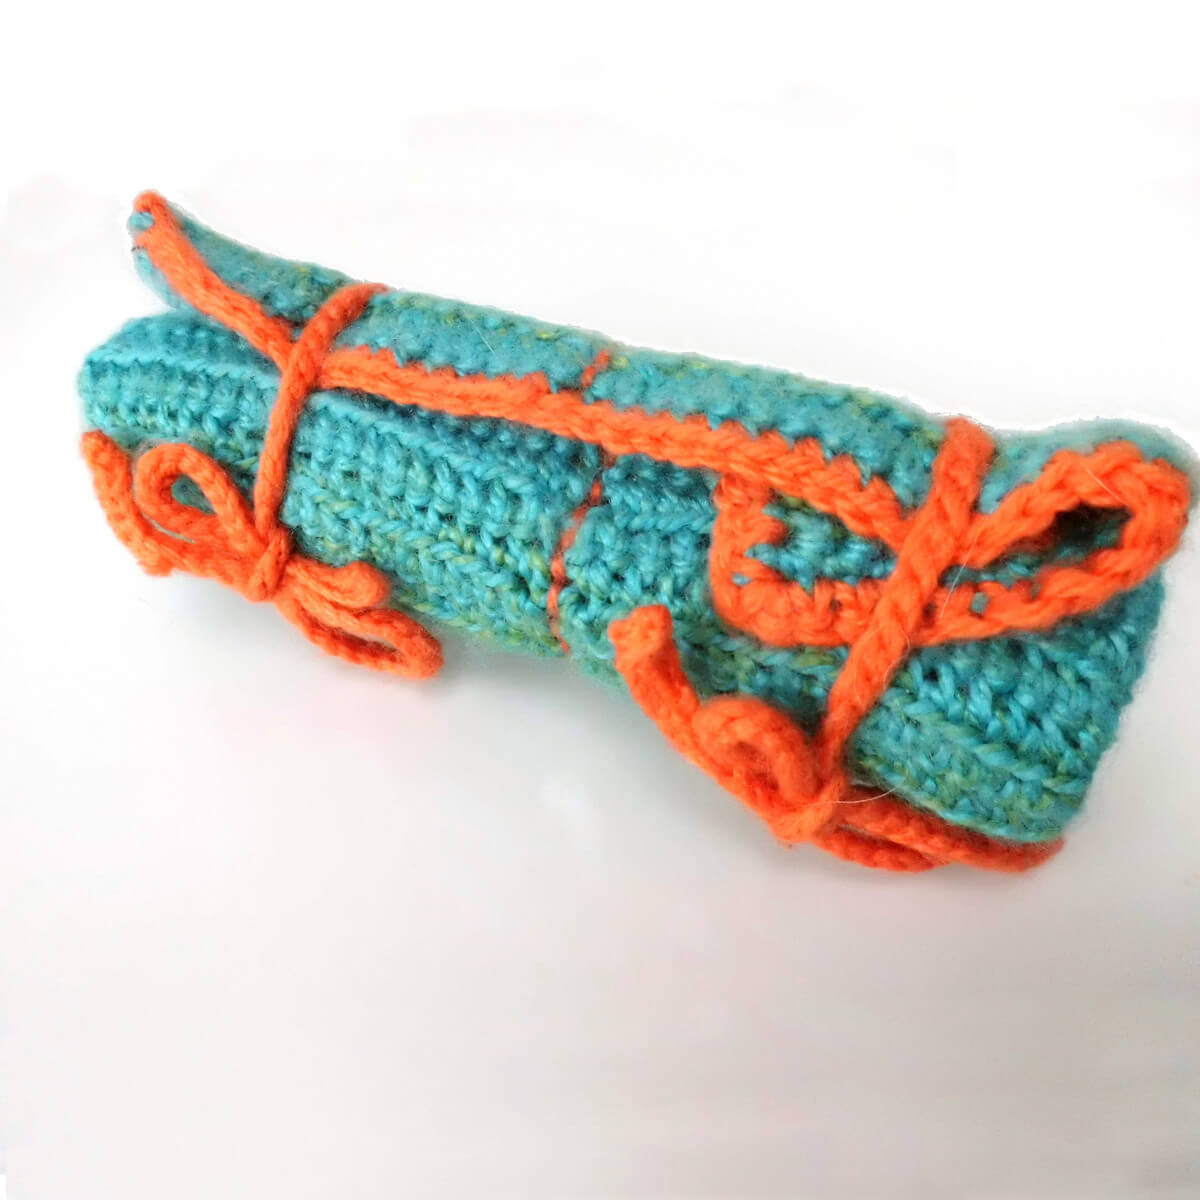 How To Make A Easy Crochet Hook Pouch